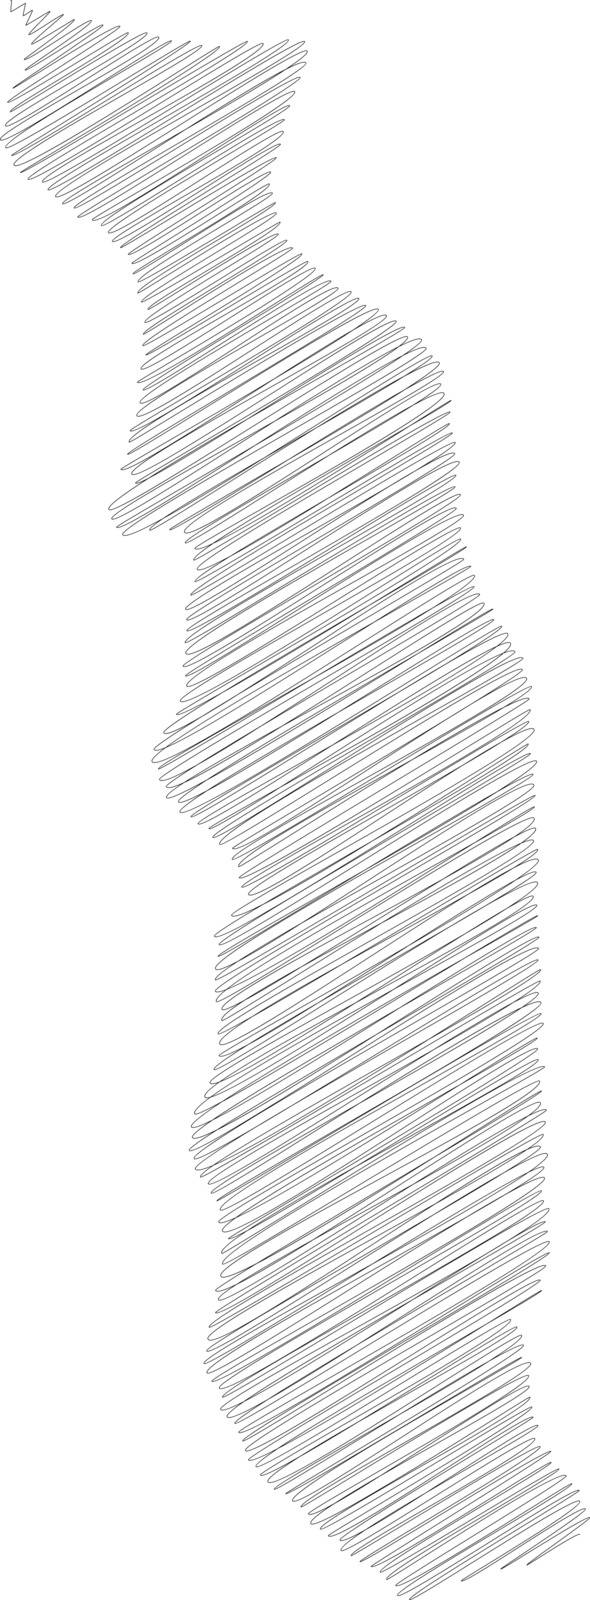 Togo - pencil scribble sketch silhouette map of country area with dropped shadow. Simple flat vector illustration.